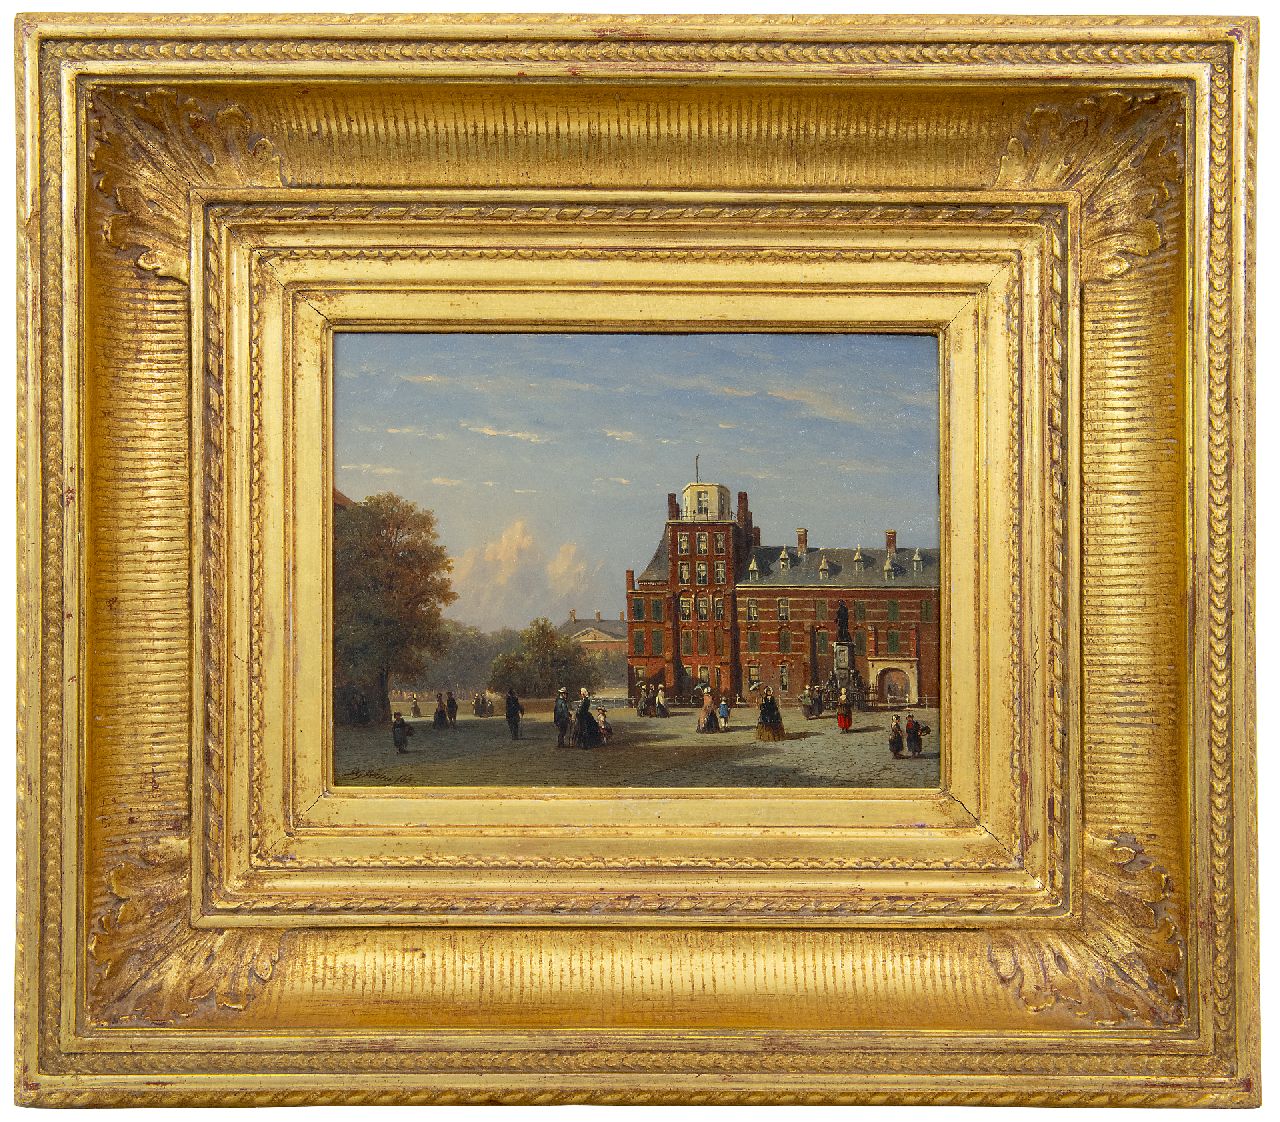 Vertin P.G.  | Petrus Gerardus Vertin | Paintings offered for sale | View of the Buitenhof in The Hague, as seen in the direction of the Stadhouderlijk Kwartier, oil on panel 18.6 x 25.2 cm, signed l.l. and dated '62